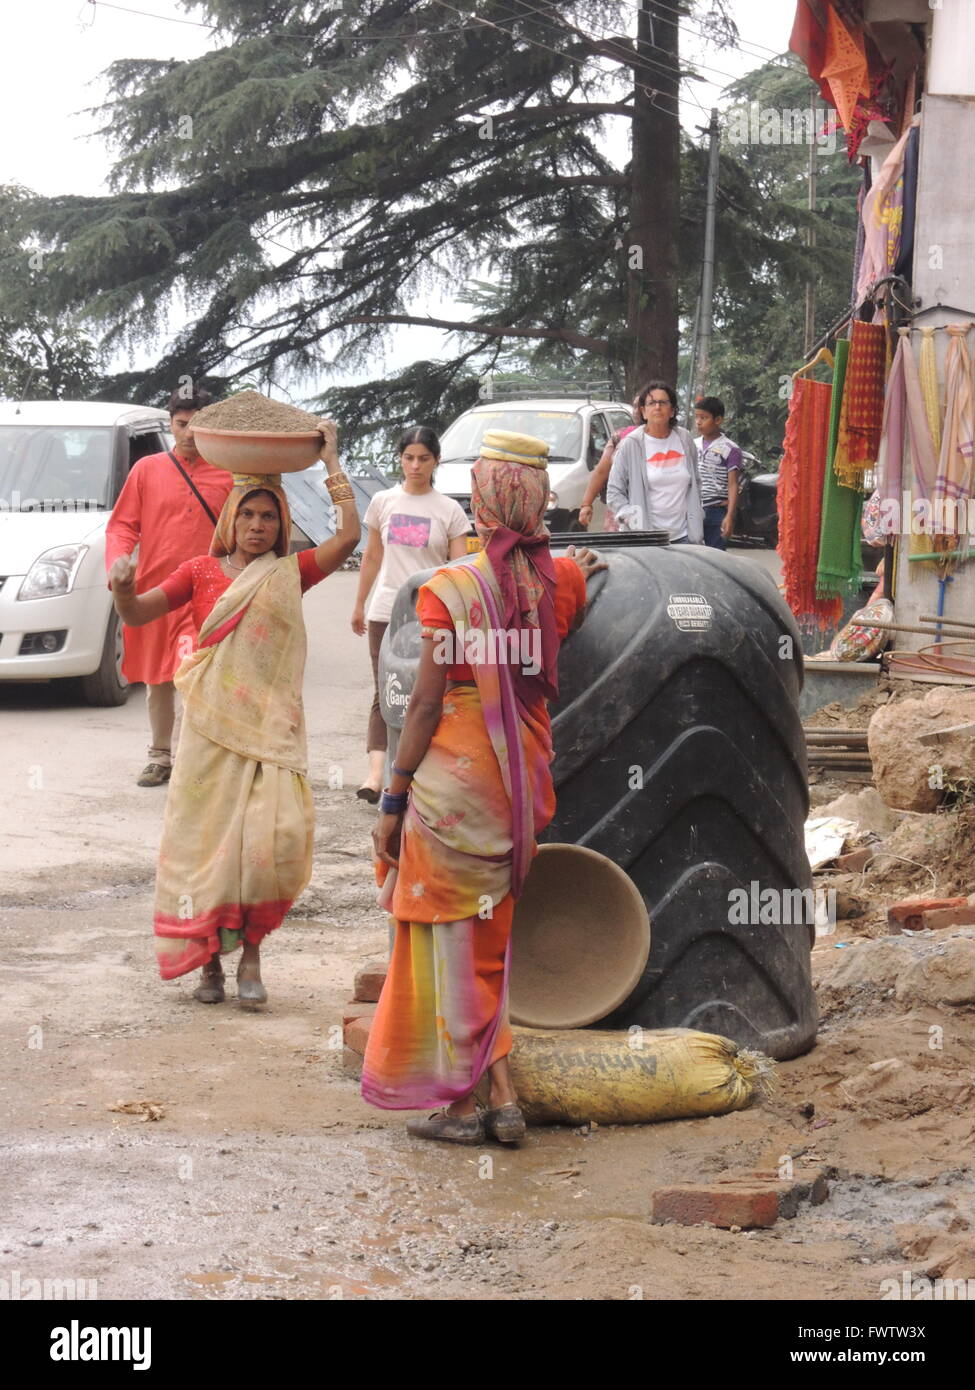 Poor Indian woman carries rubble on her head working at a construction site while modern cars go by in the background Stock Photo